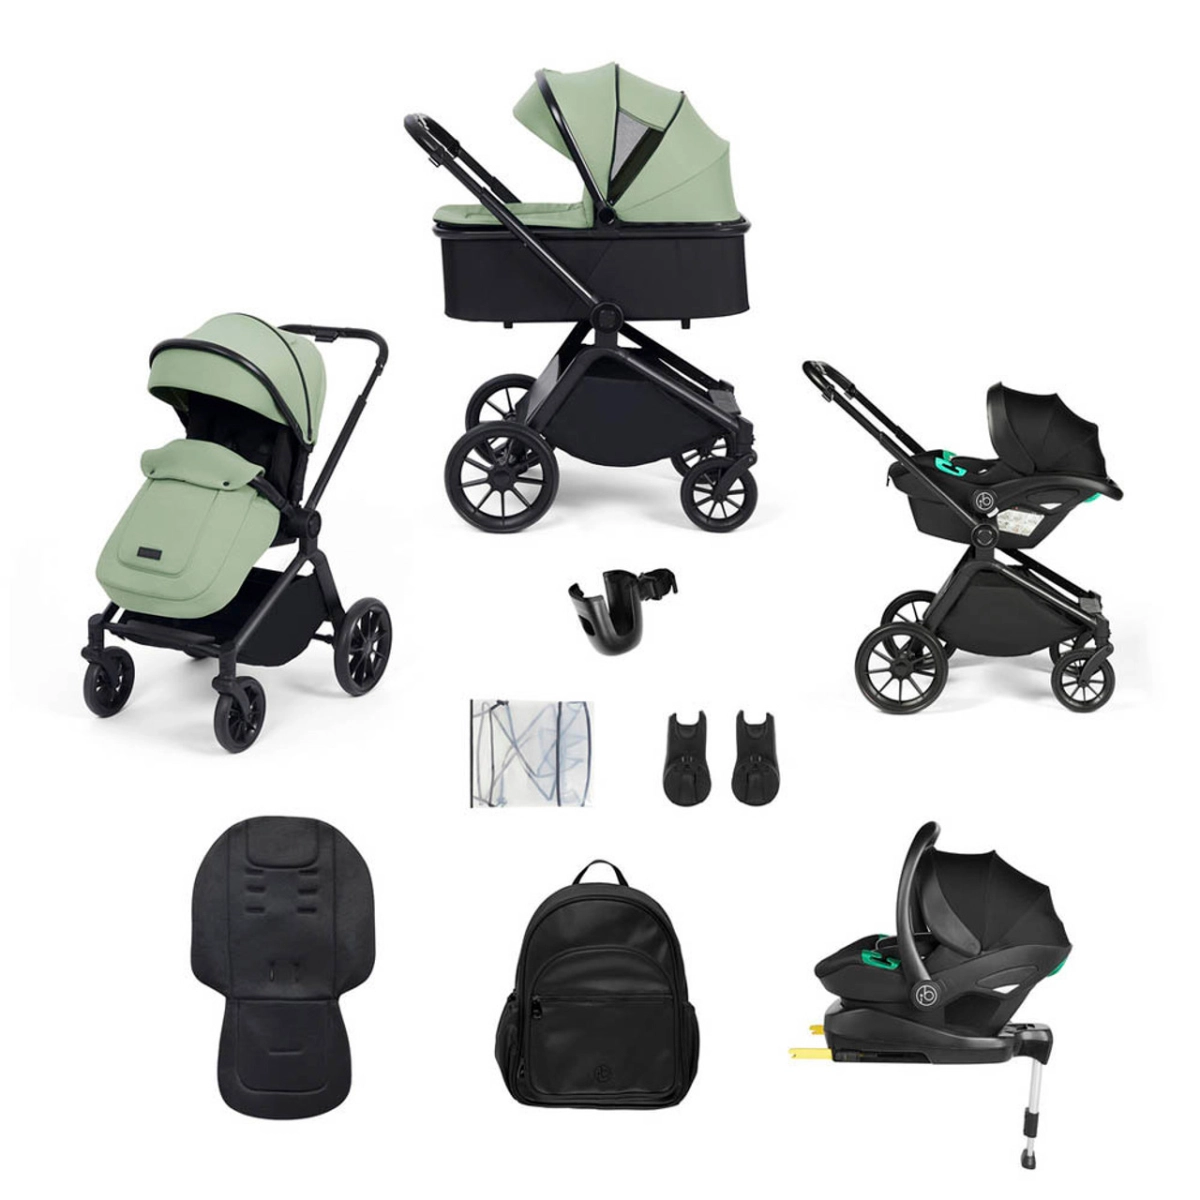 Image of Ickle Bubba Altima Black Frame Travel System with Stratus i-Size Car Seat & Isofix Base - Sage Green